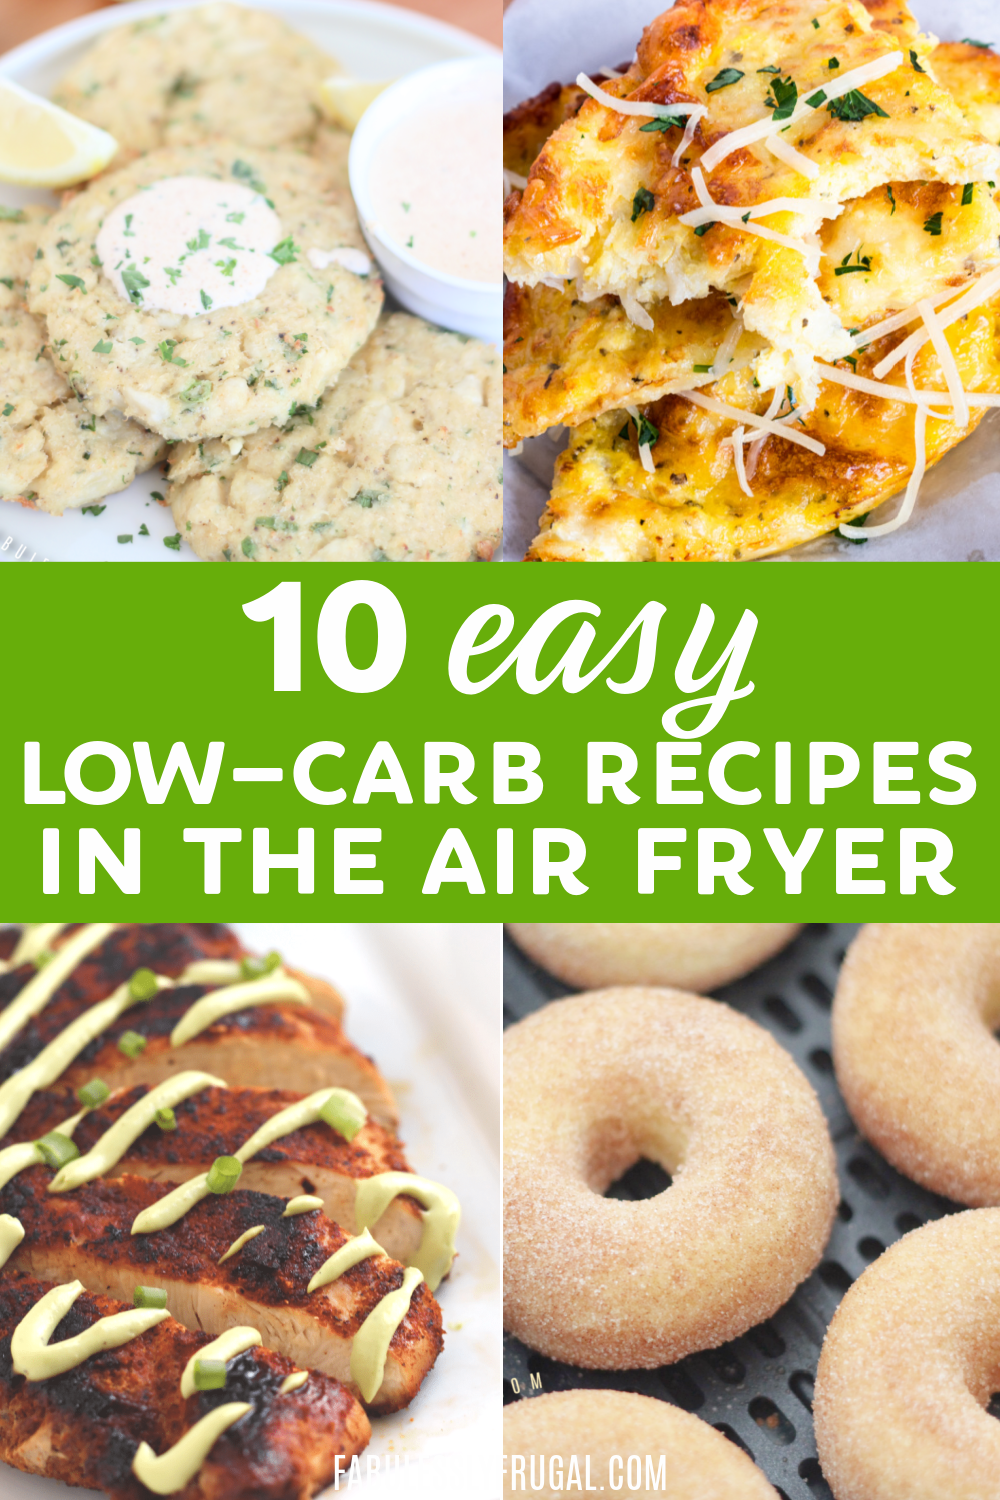 10 Easy Keto and Low-Carb Recipes in the Air Fryer for Anyone!